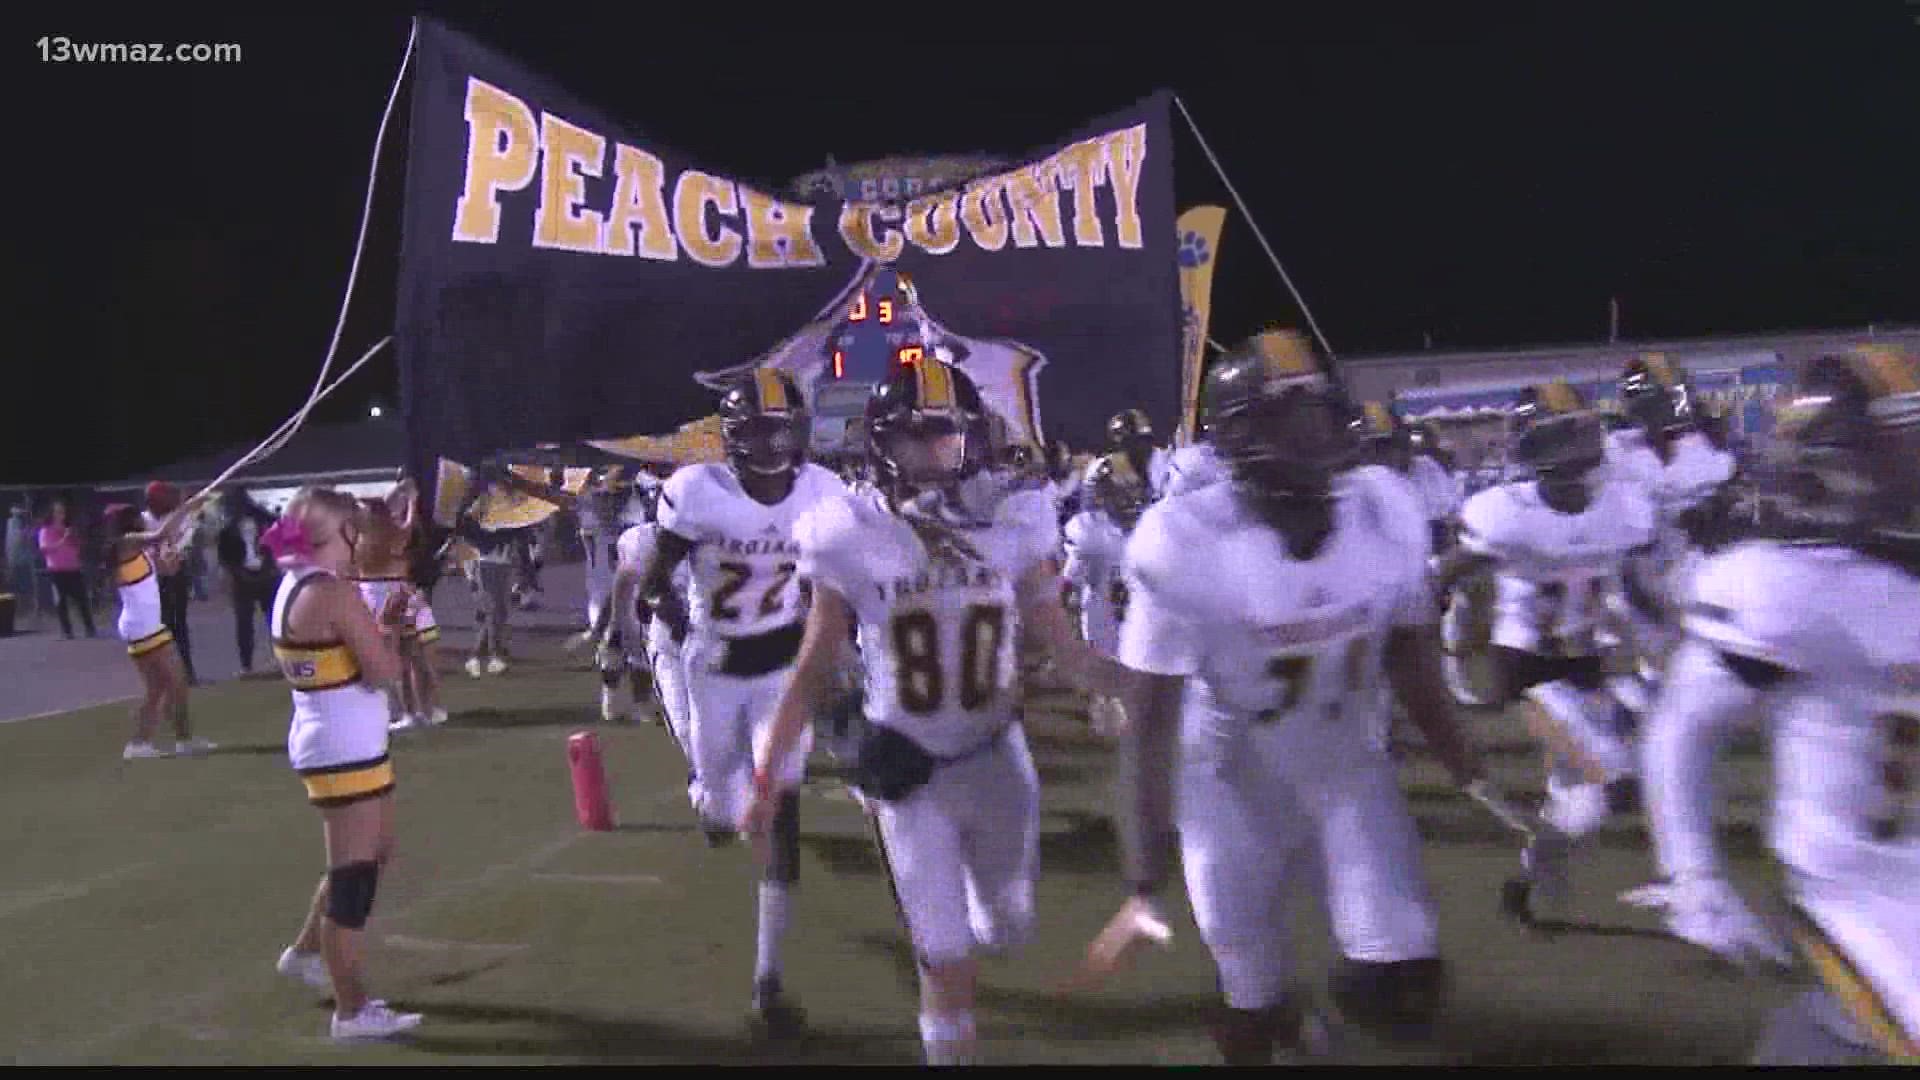 At Trojan Stadium in Fort Valley, the big region showdown between visiting Crisp County and the hosts with the most, Peach County is happening this Friday night